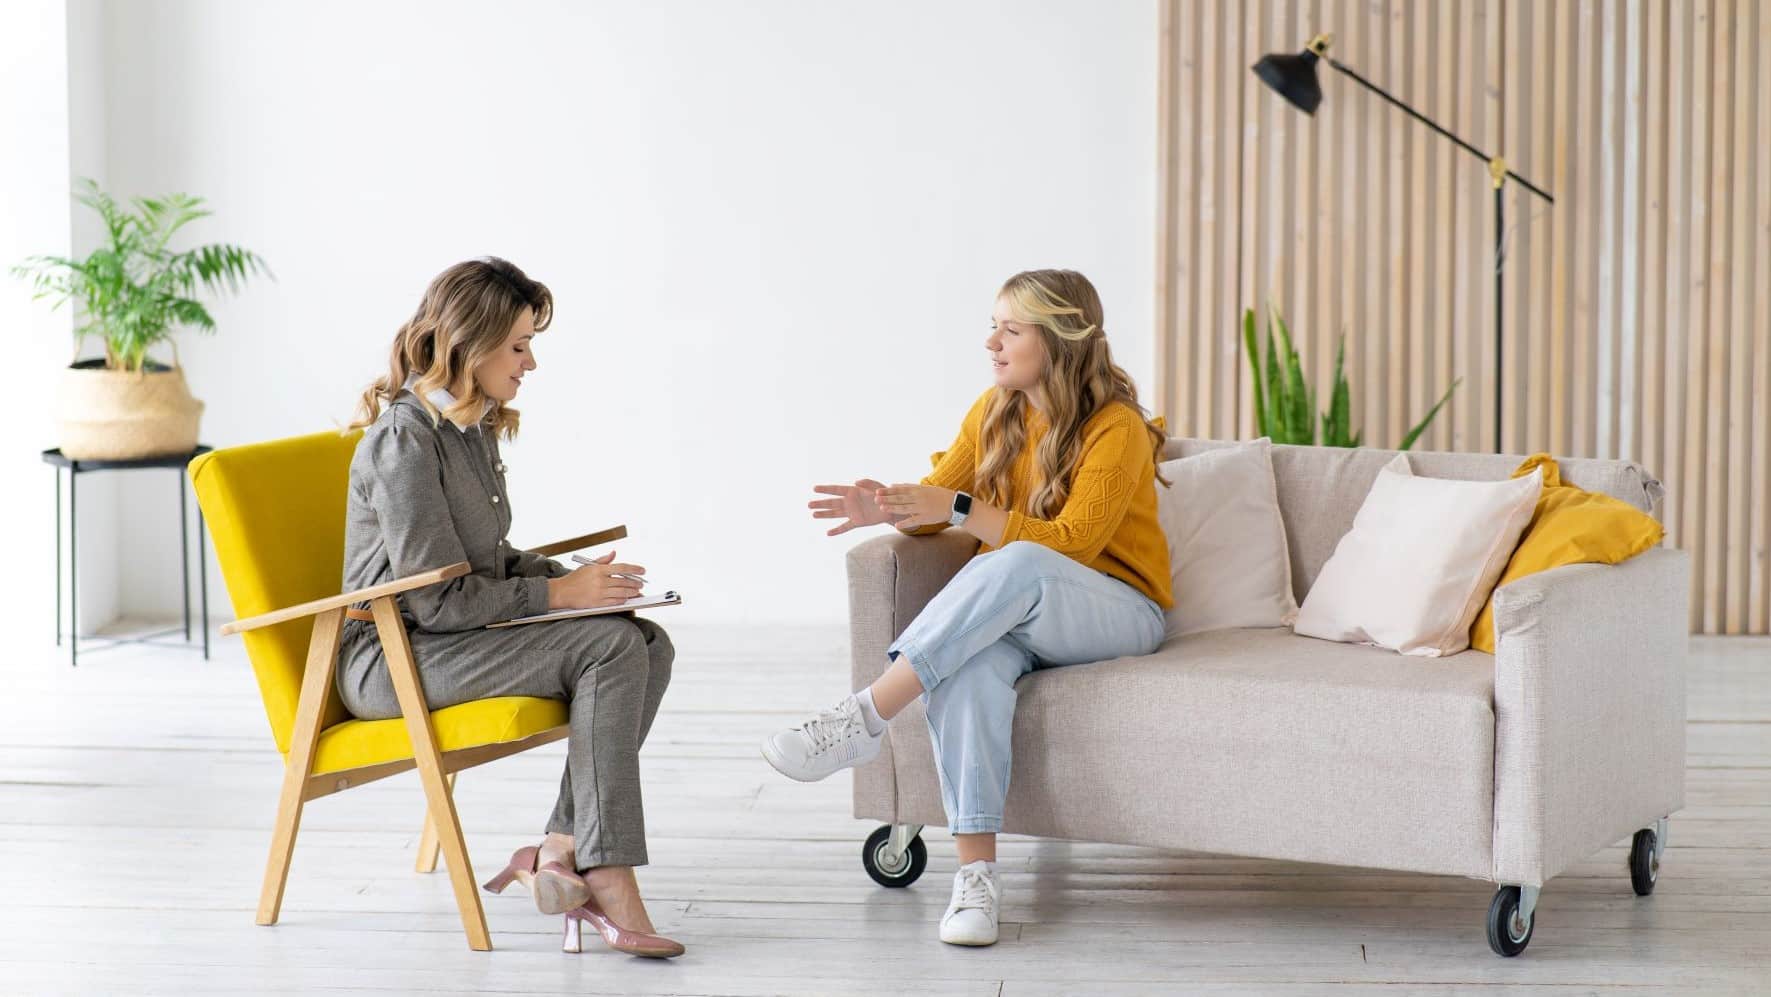 Young adult woman in an orange sweater sitting on a white sofa talking to a woman therapist with a clipboard. The therapist is wearing a gray suit.